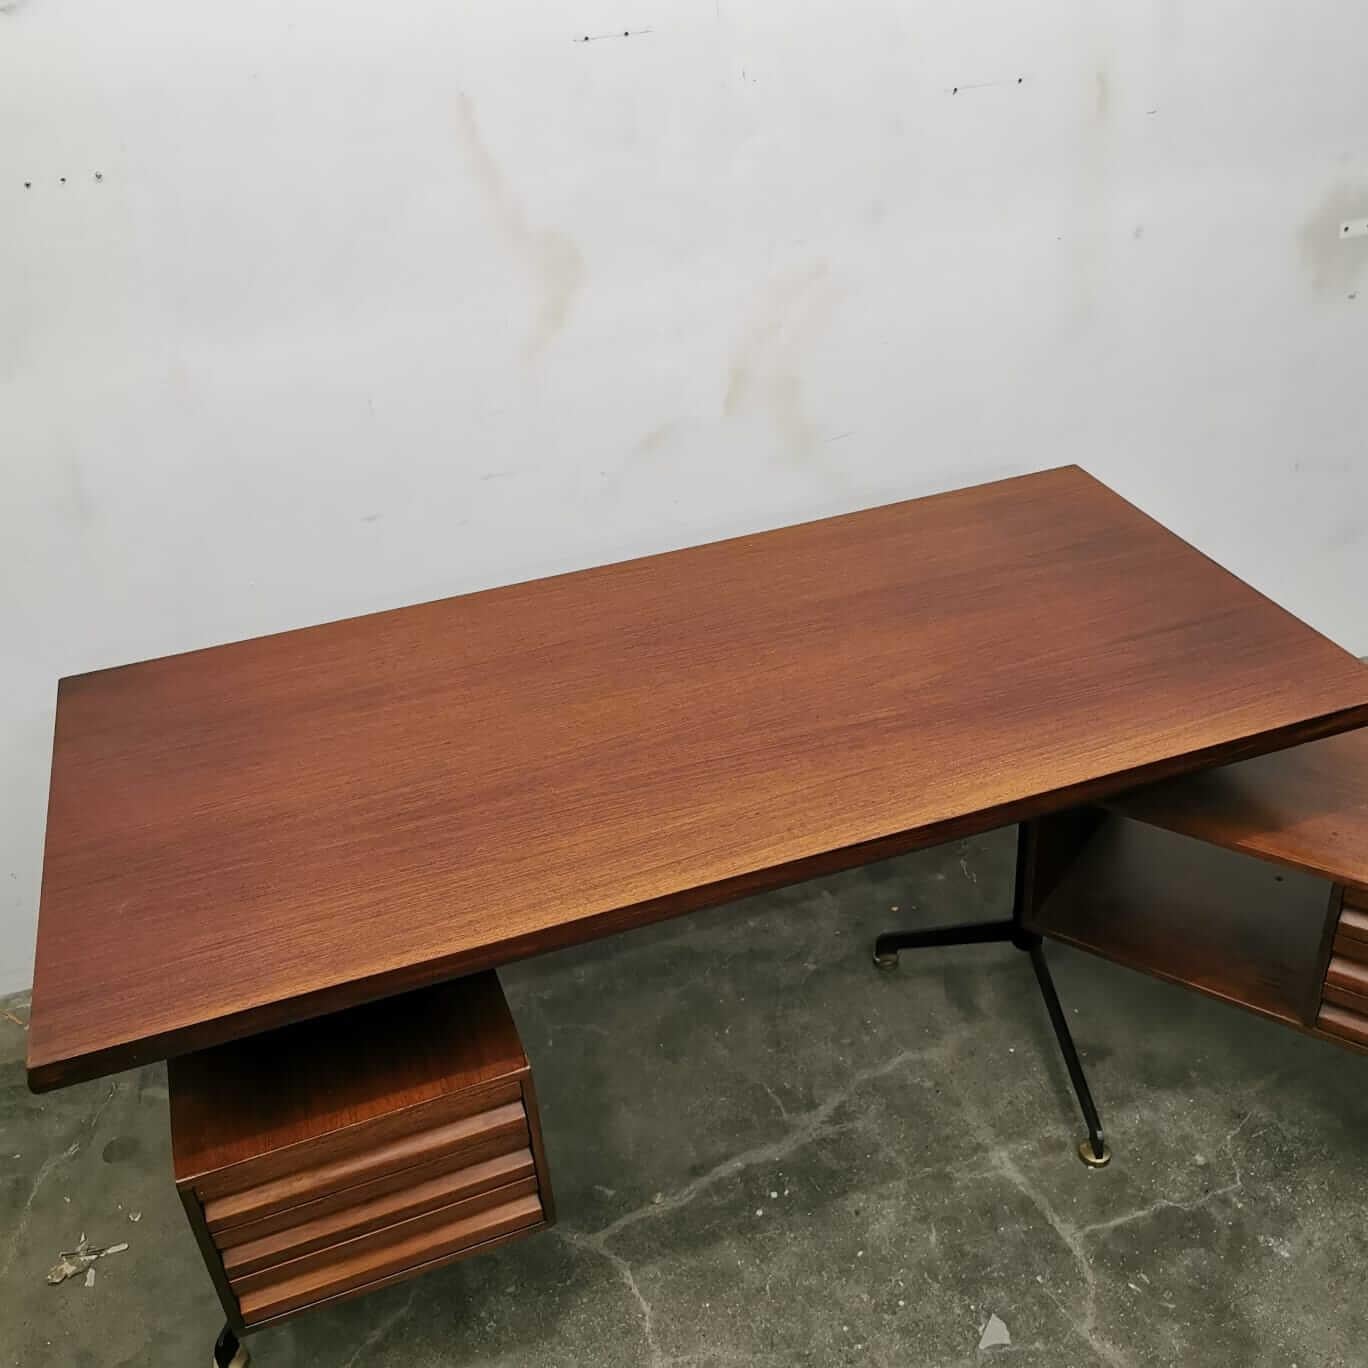 Desk made of rosewood, steel, polished aluminum, interchangeable drawers applied to the frame. Designed by Osvaldo Borsani, style mod erno Italian style, this desk is large and multifunctional, a well thought out object perfect for those looking for